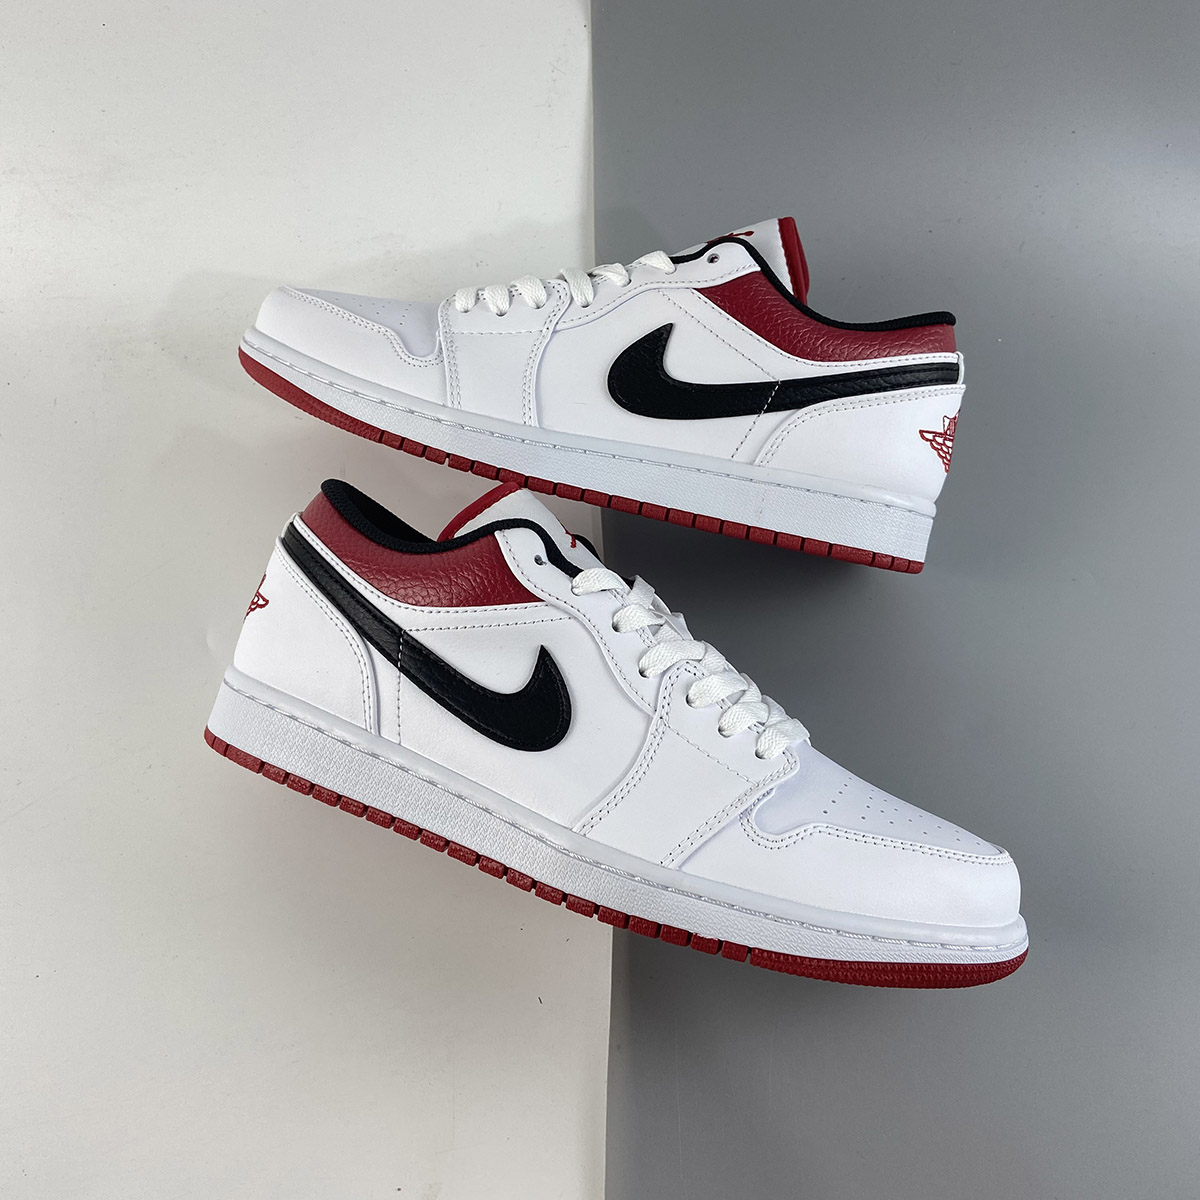 Air Jordan 1 Low White University Red Black For Sale – The Sole Line